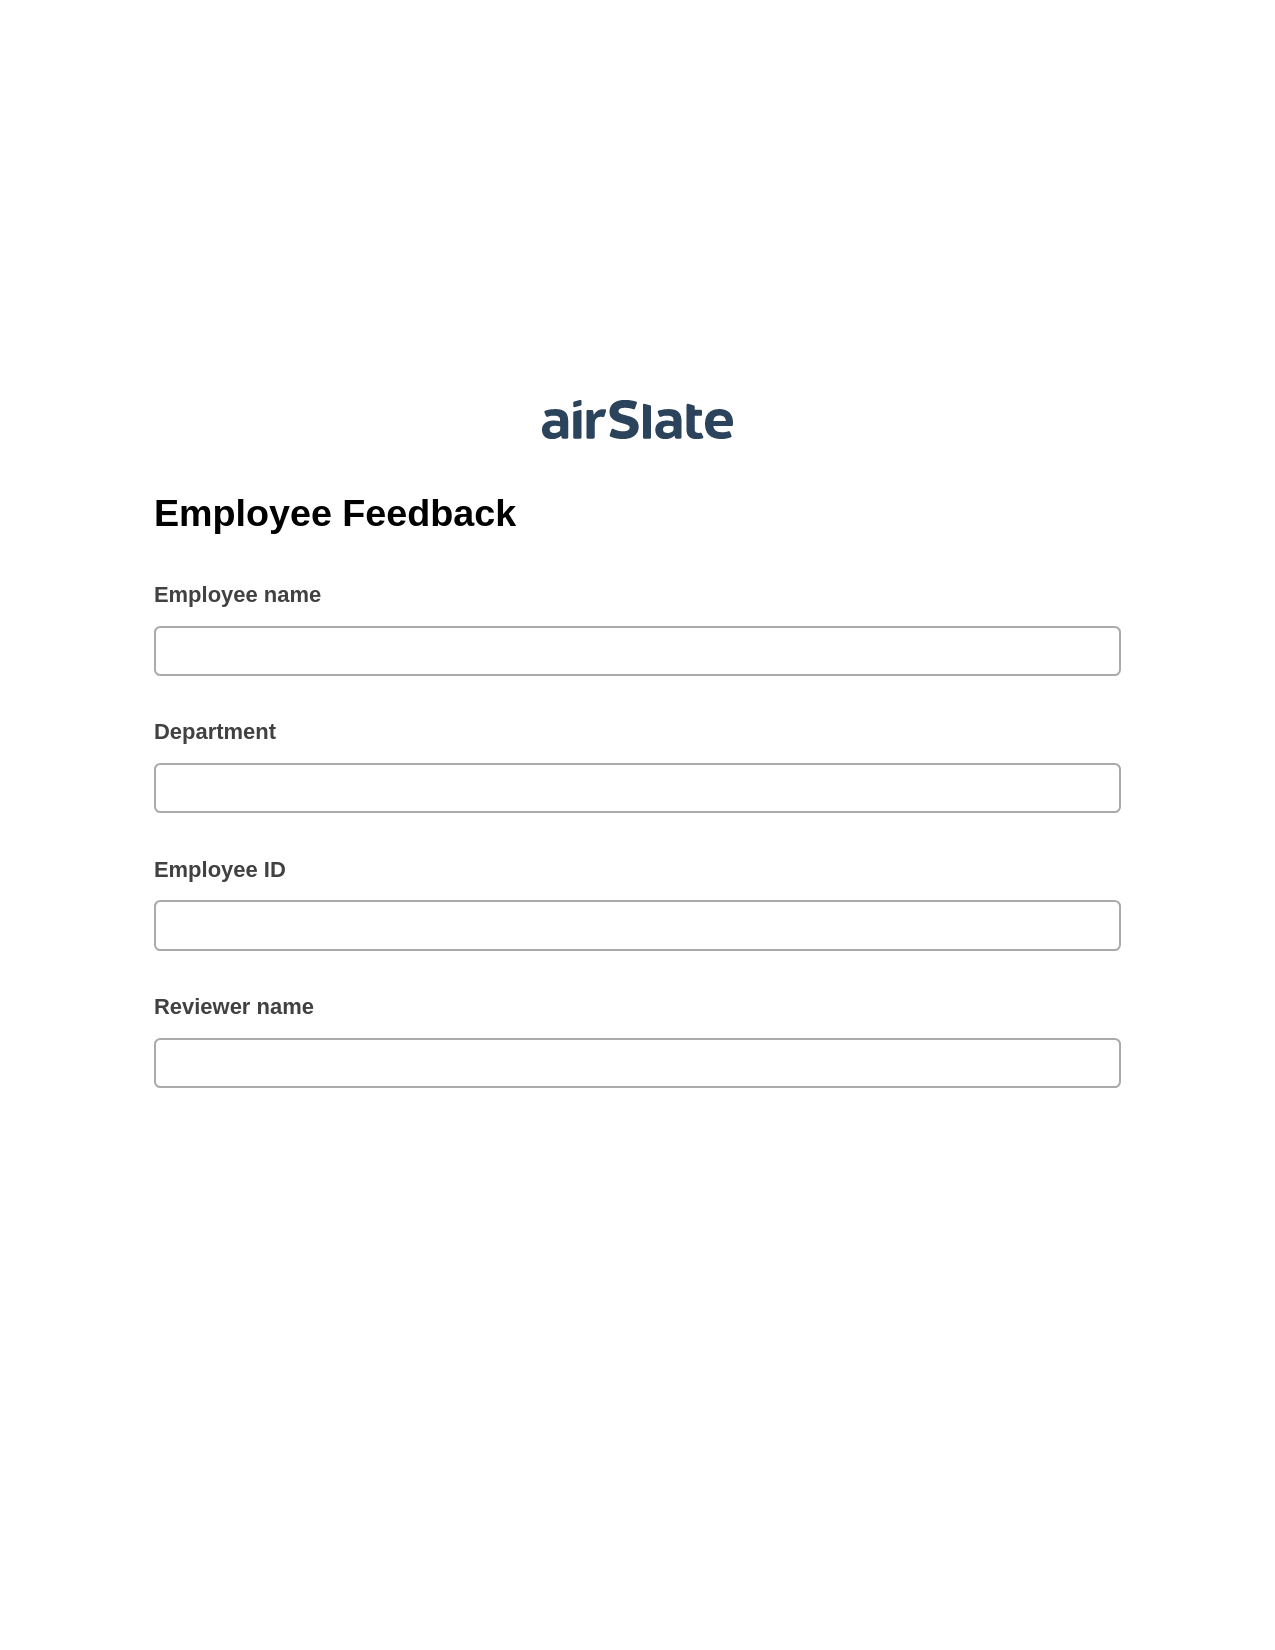 Employee Feedback Pre-fill from Google Sheet Dropdown Options Bot, Add Tags to Slate Bot, Export to Smartsheet